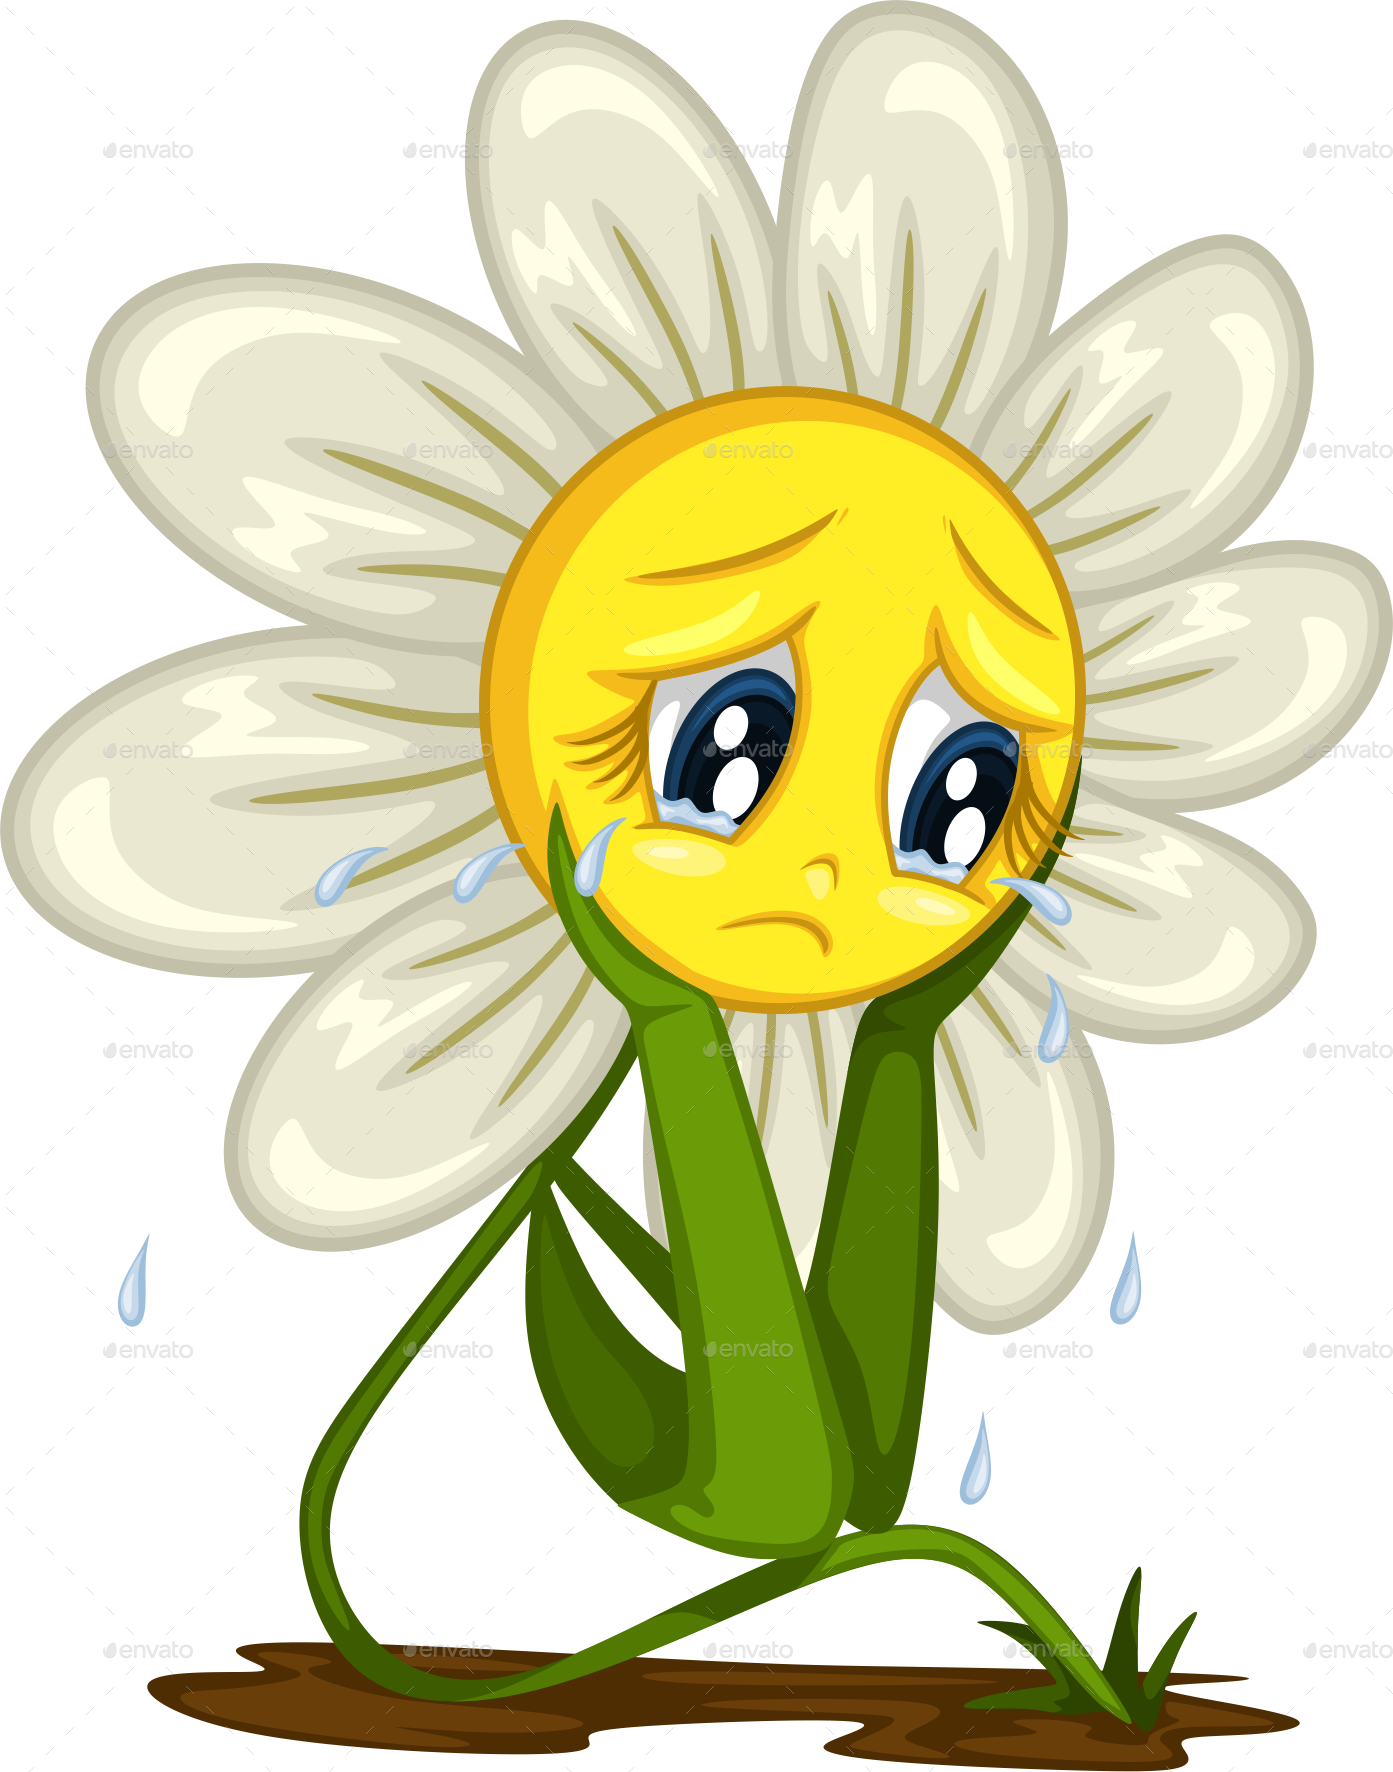 Cartoon stickers for different. Daisy clipart smile